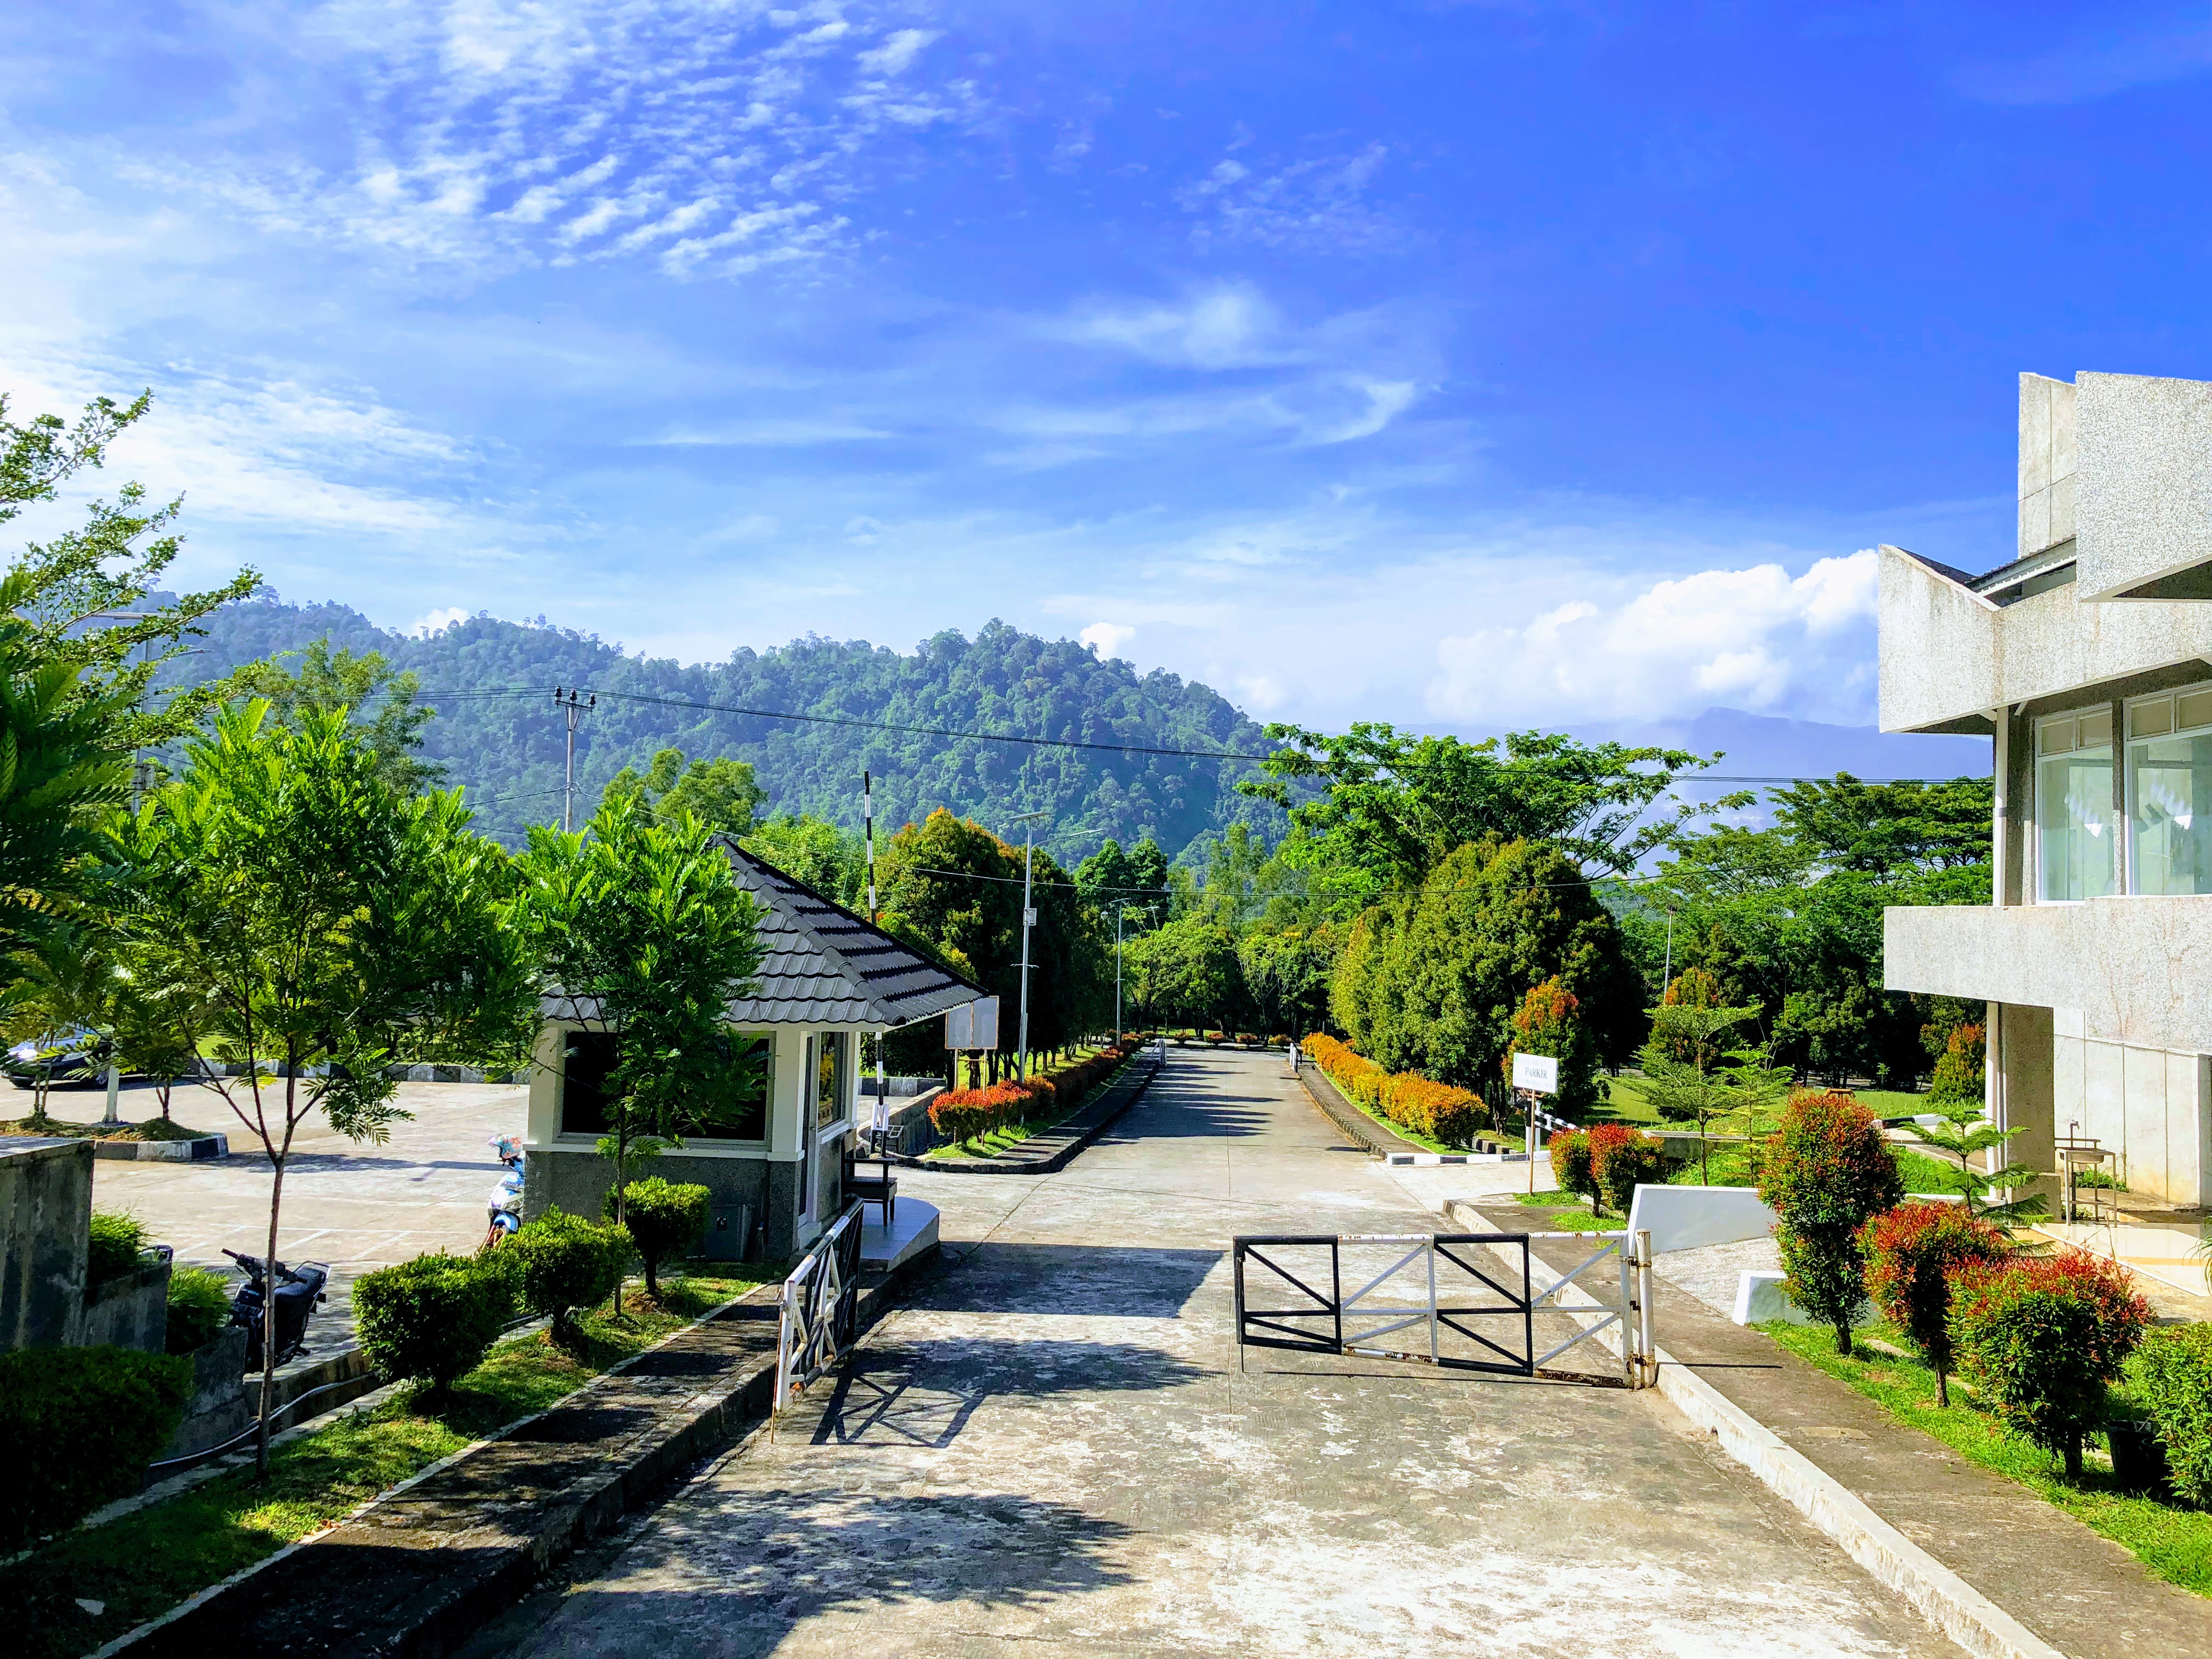 One view from Andalas University campus.